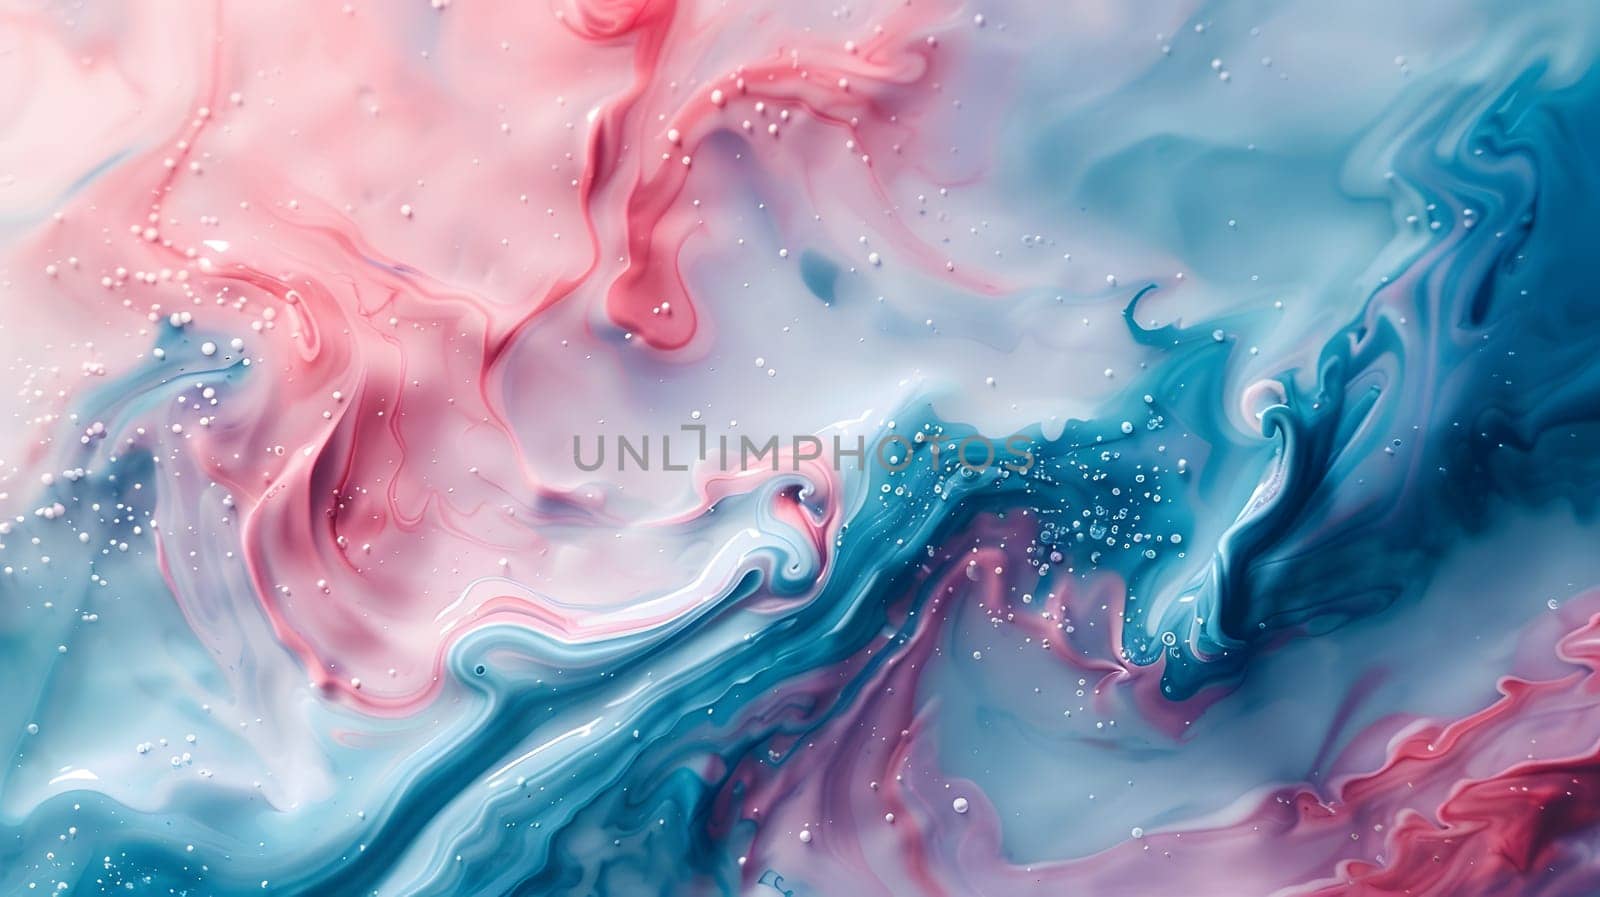 Liquid art pink and blue marble pattern resembling wind waves by Nadtochiy